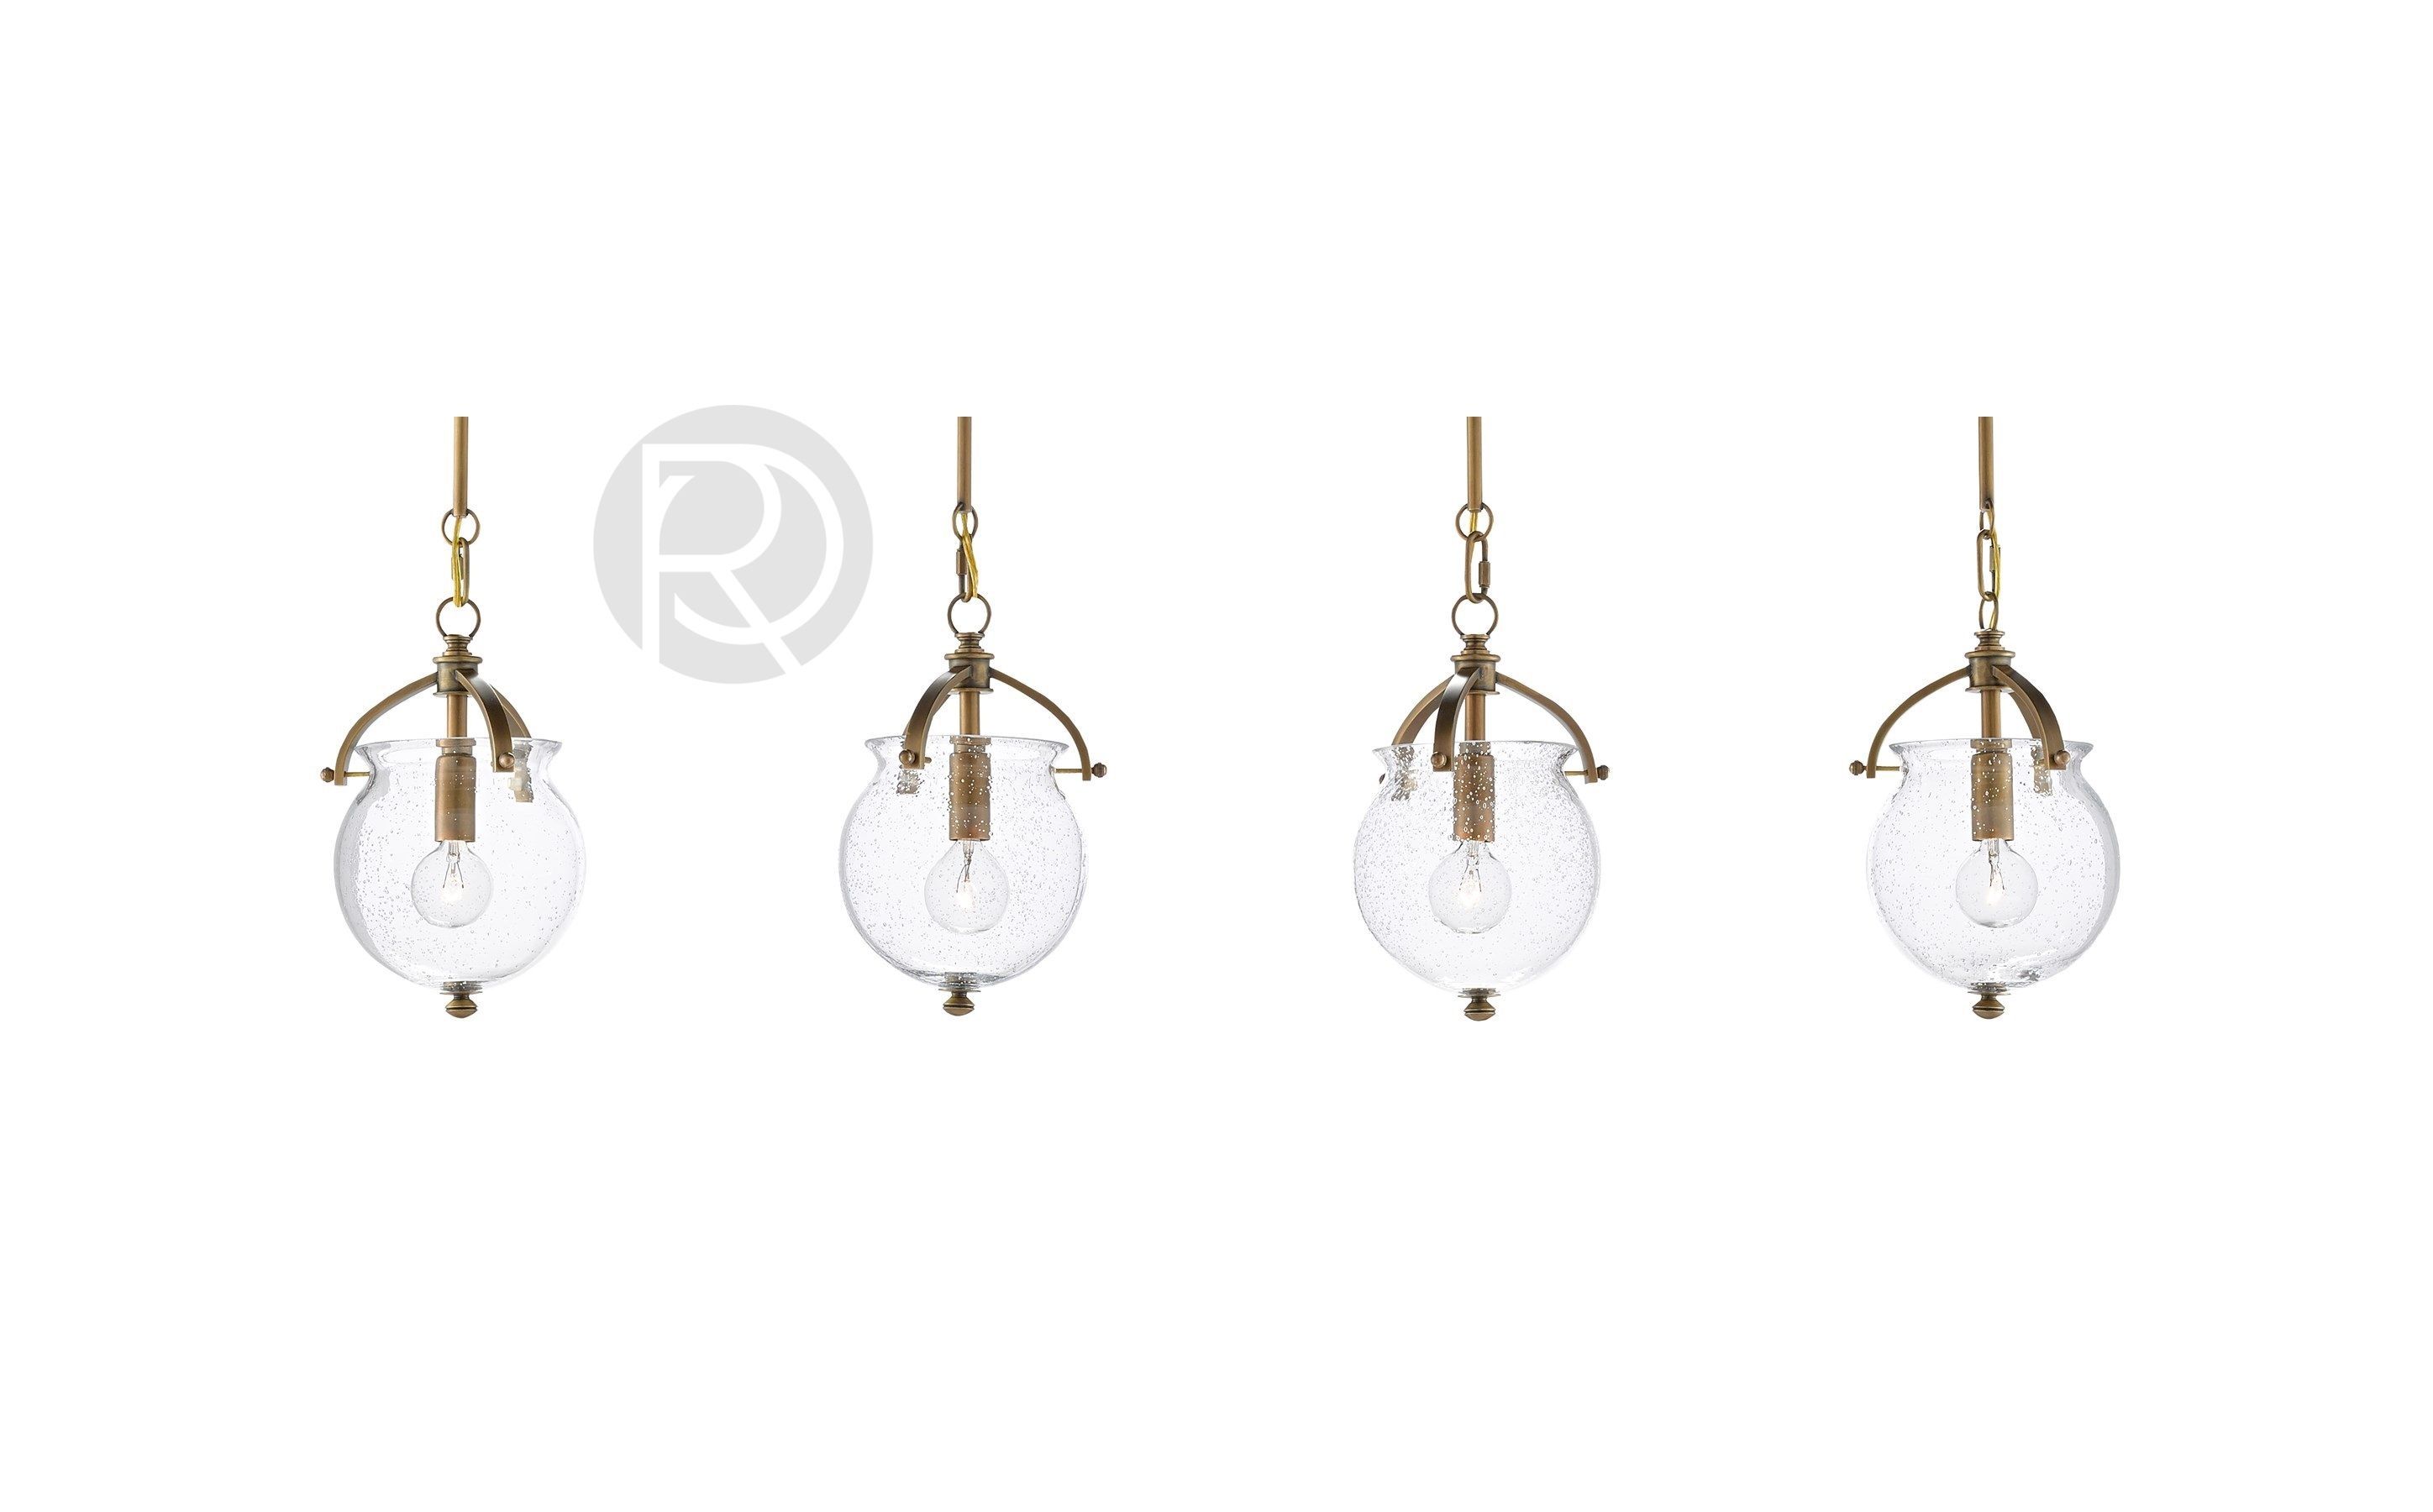 Pendant lamp PELLE MULTI by Currey & Company